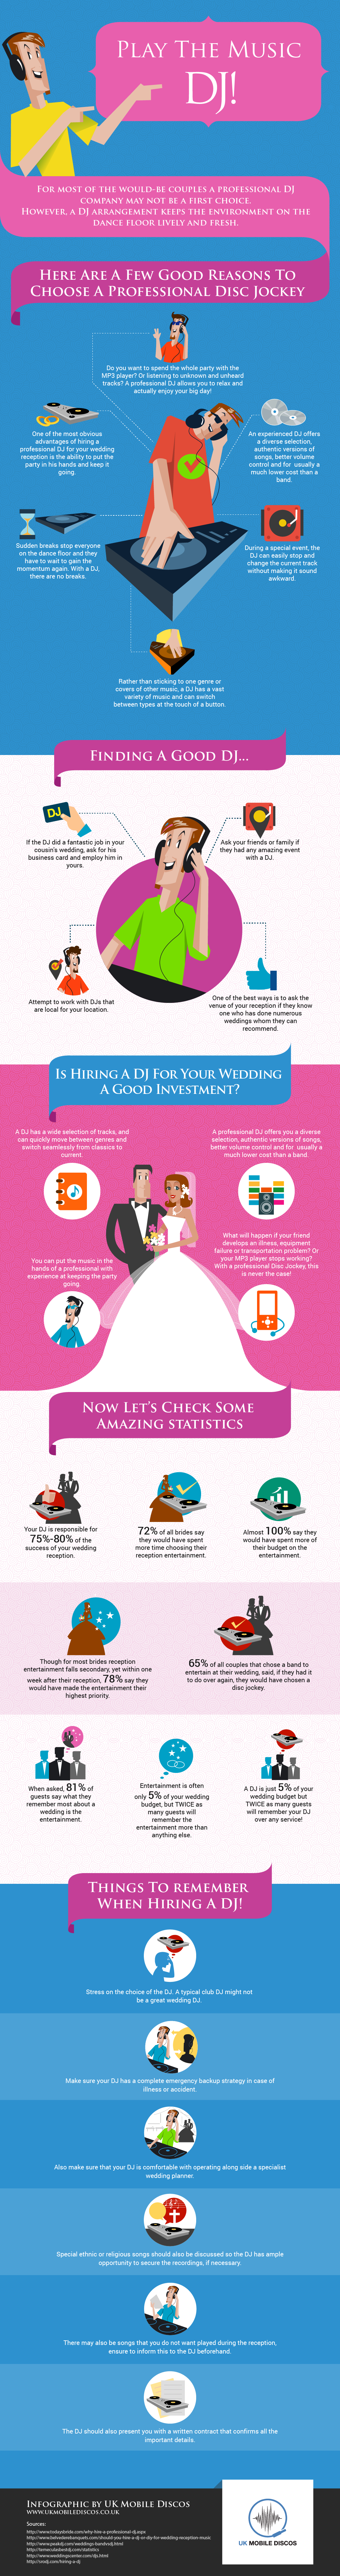 Hiring A Wedding DJ For Your Wedding Infographic